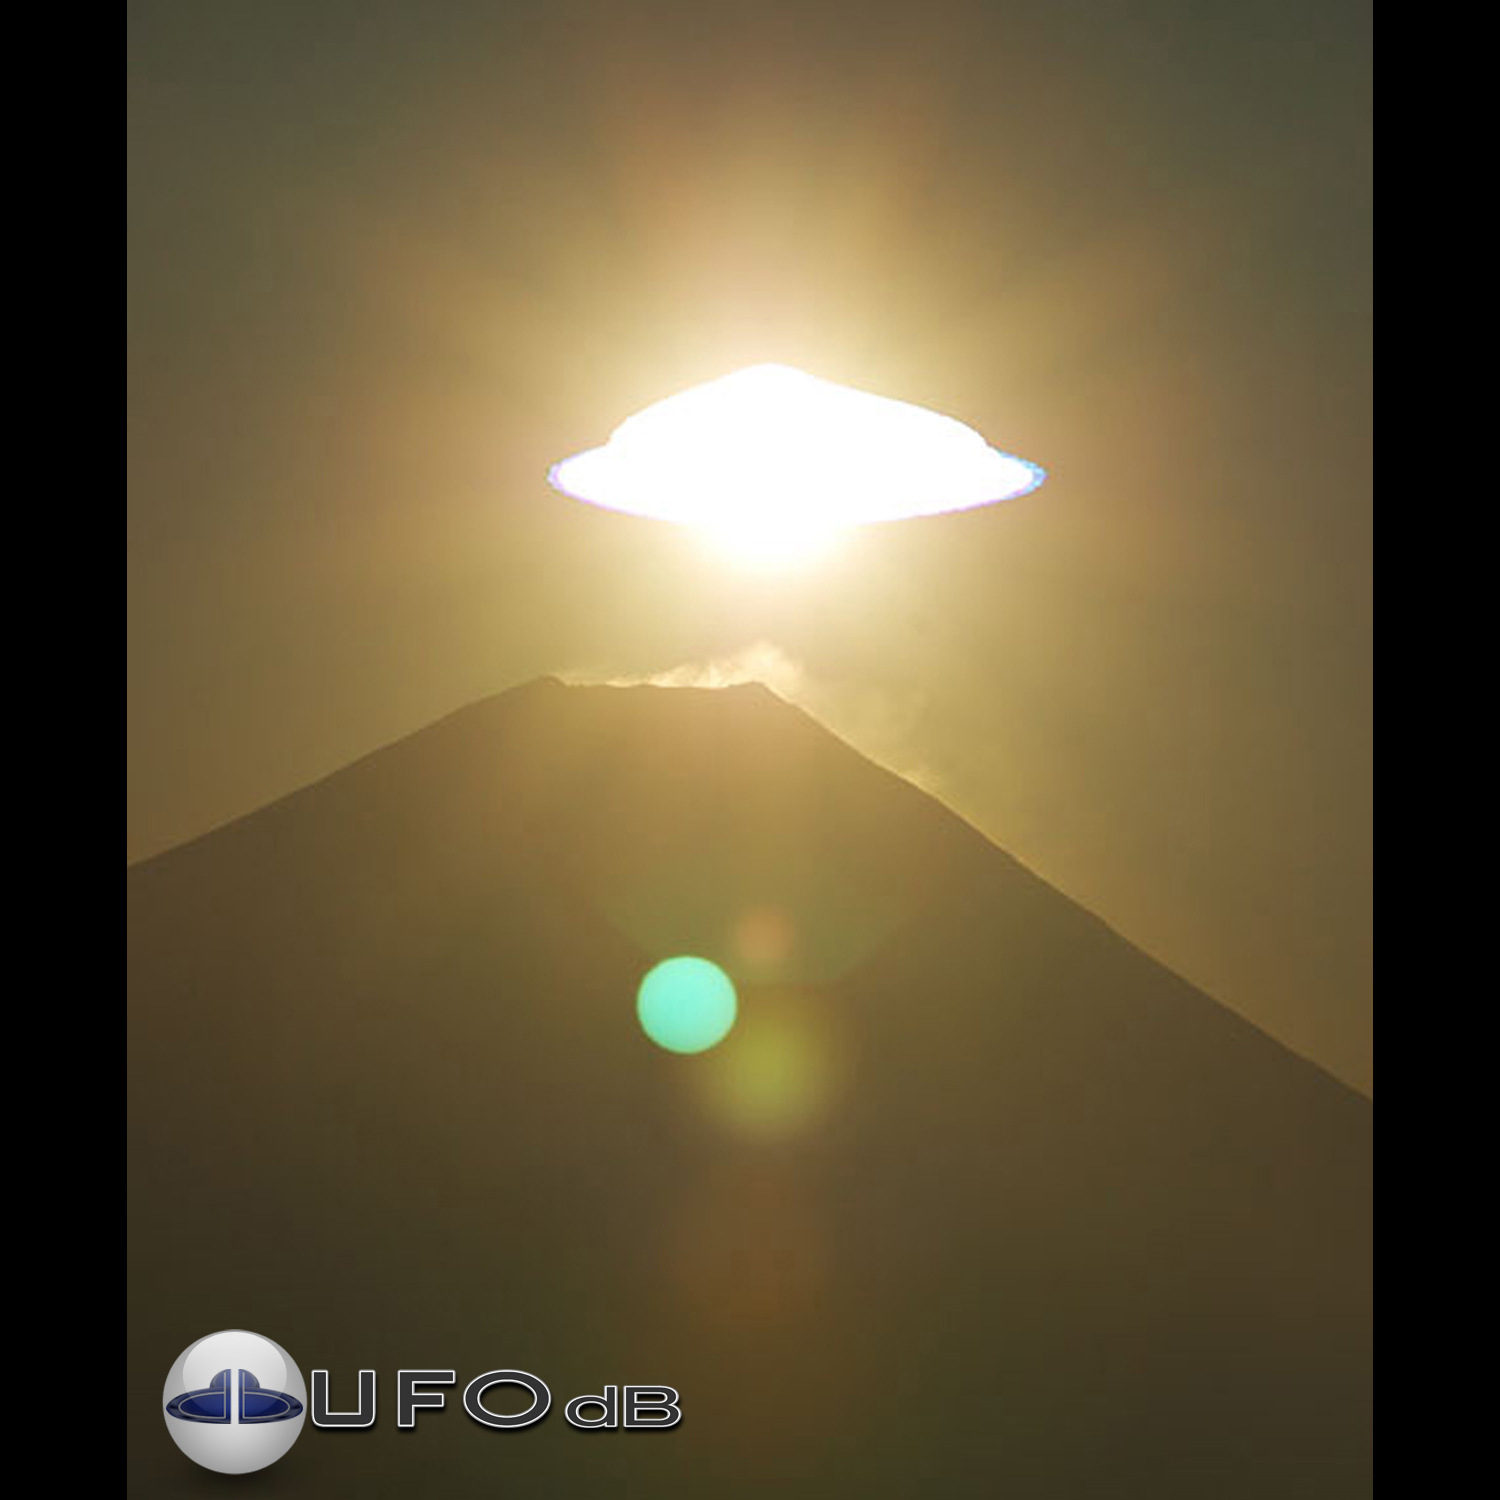 Gigantic bright glowing UFO mother ship over Mount Fuji | Japan | 2006 UFO Picture #227-1